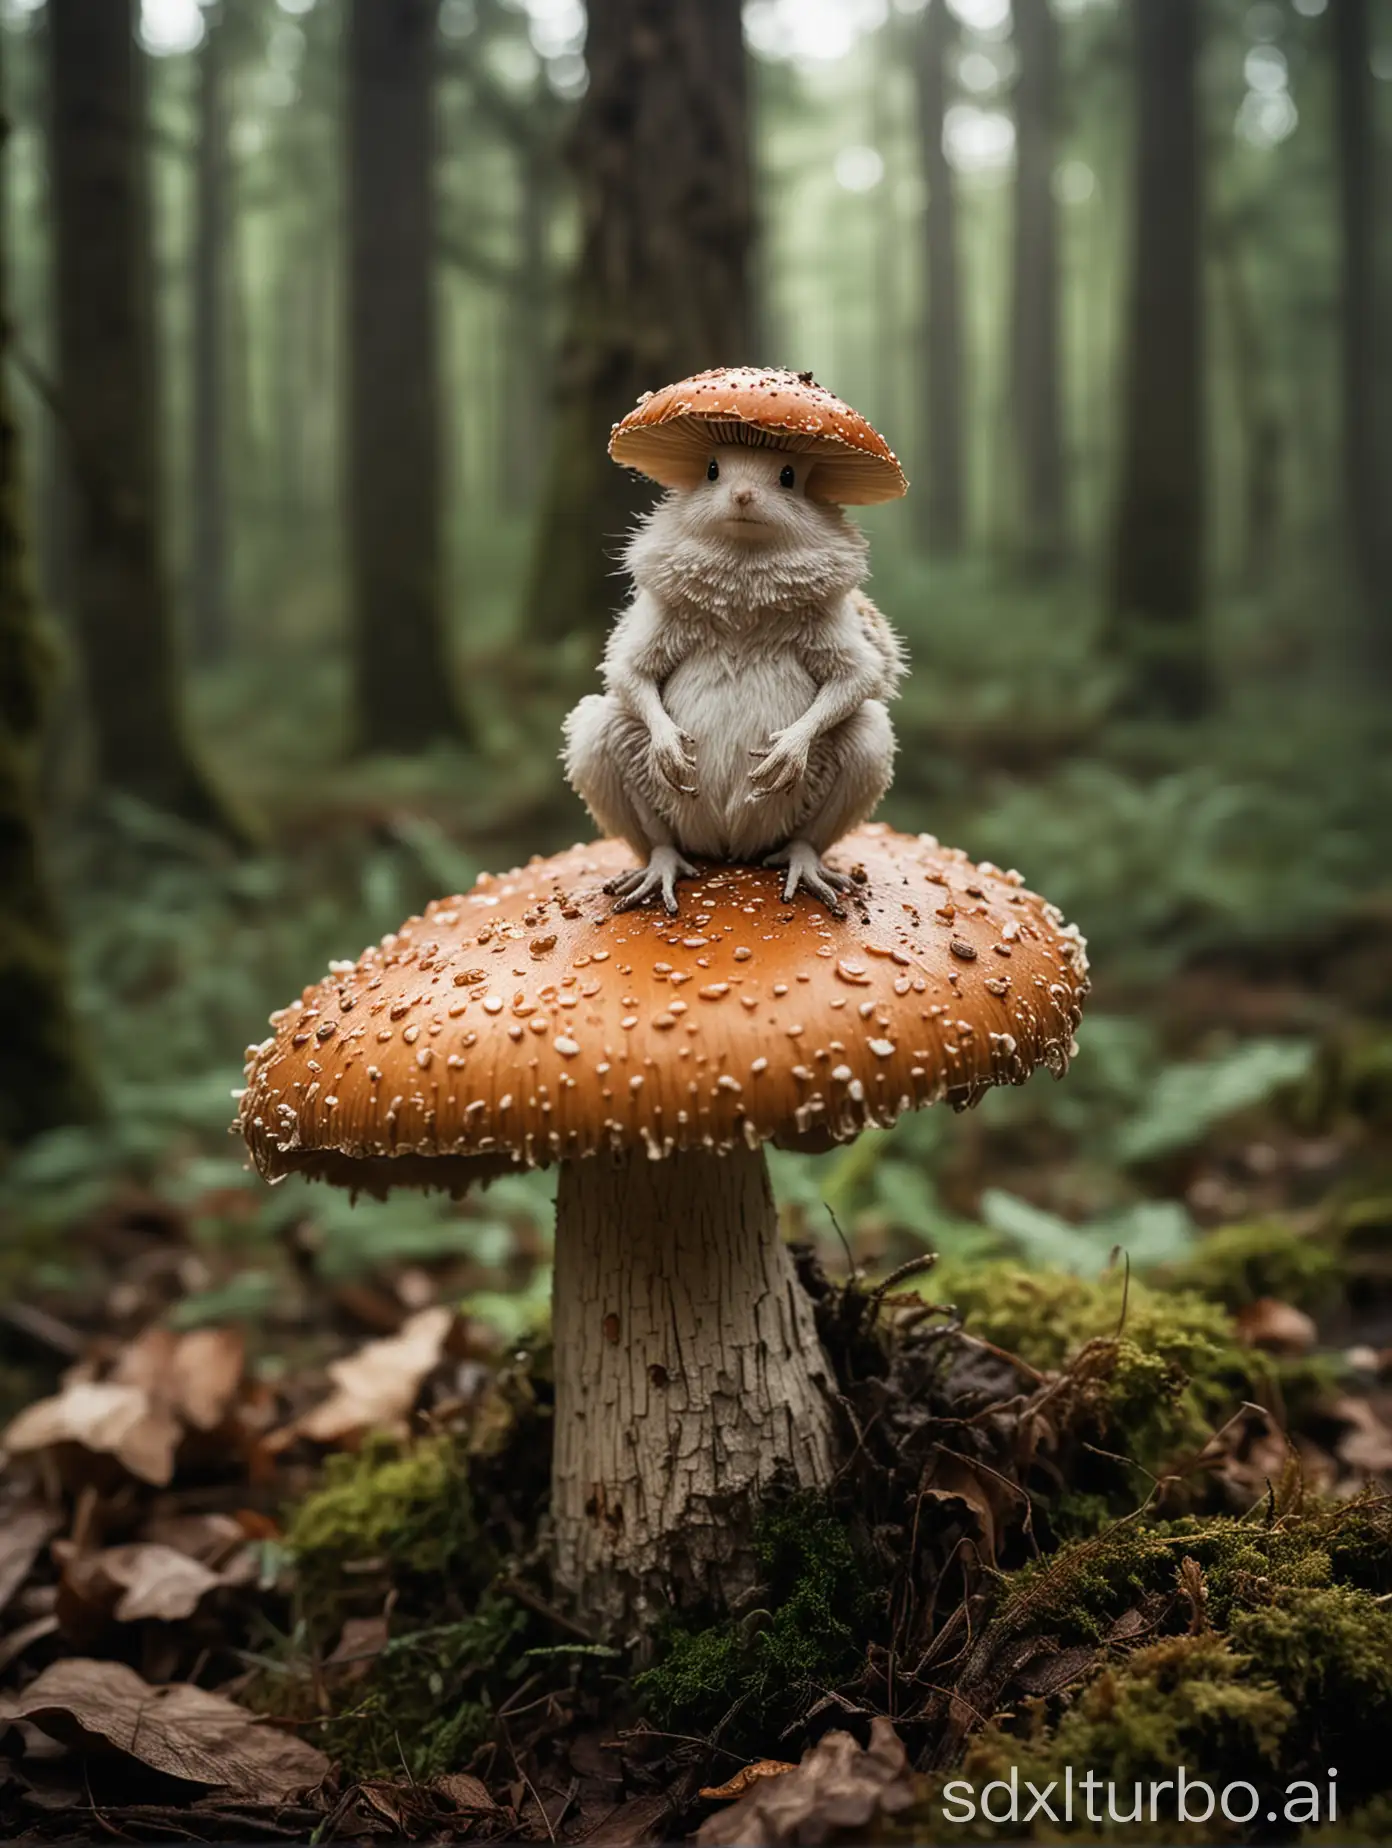 Ethereal-Encounter-Enigmatic-Faerie-Perched-on-Mushroom